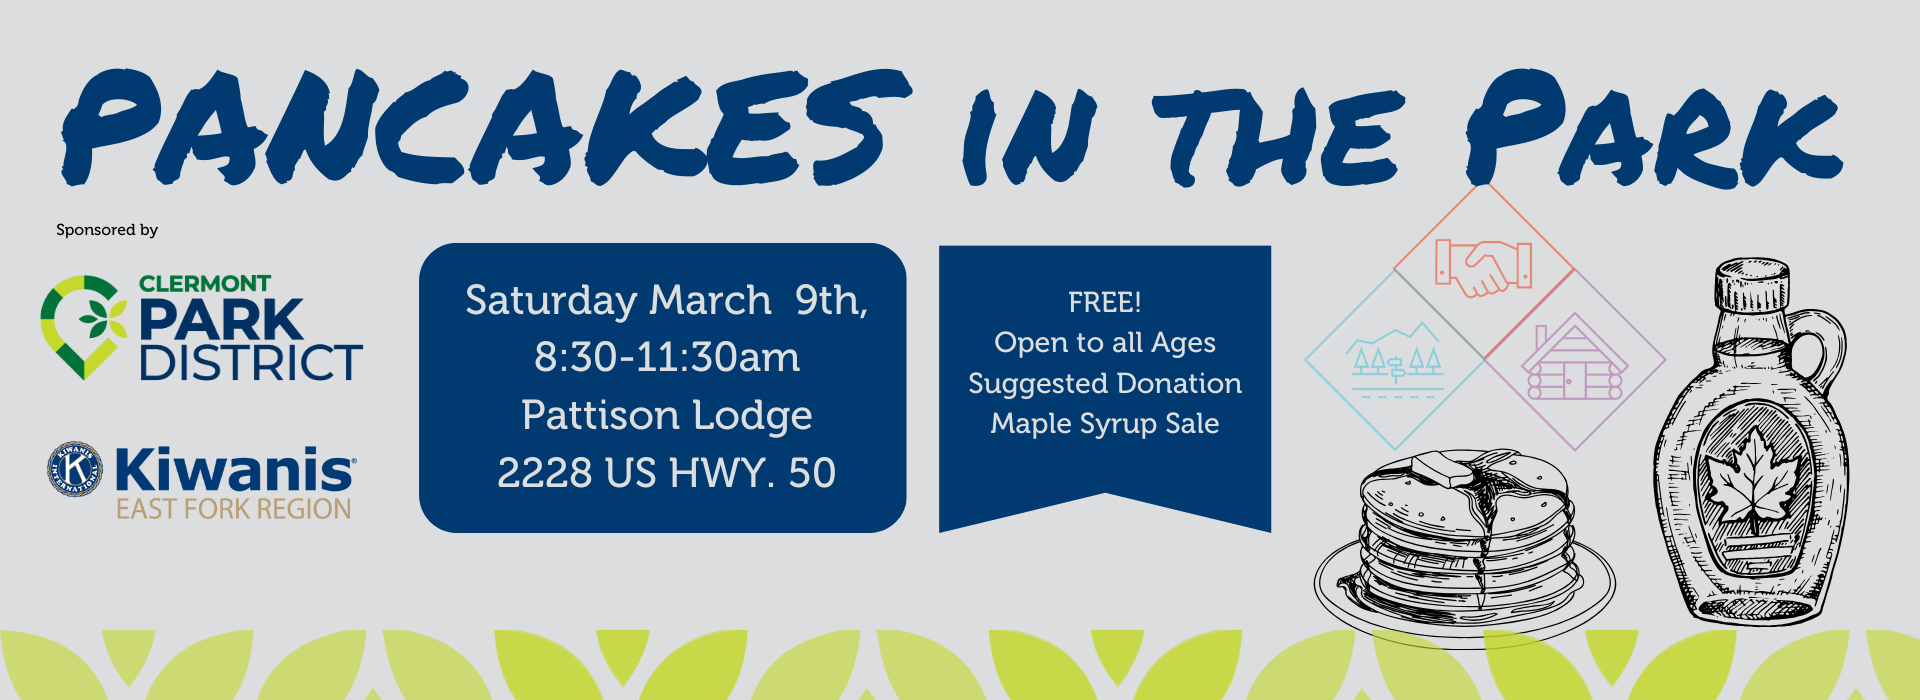 Pancakes in the Park is back at Pattison Lodge on March 9th!